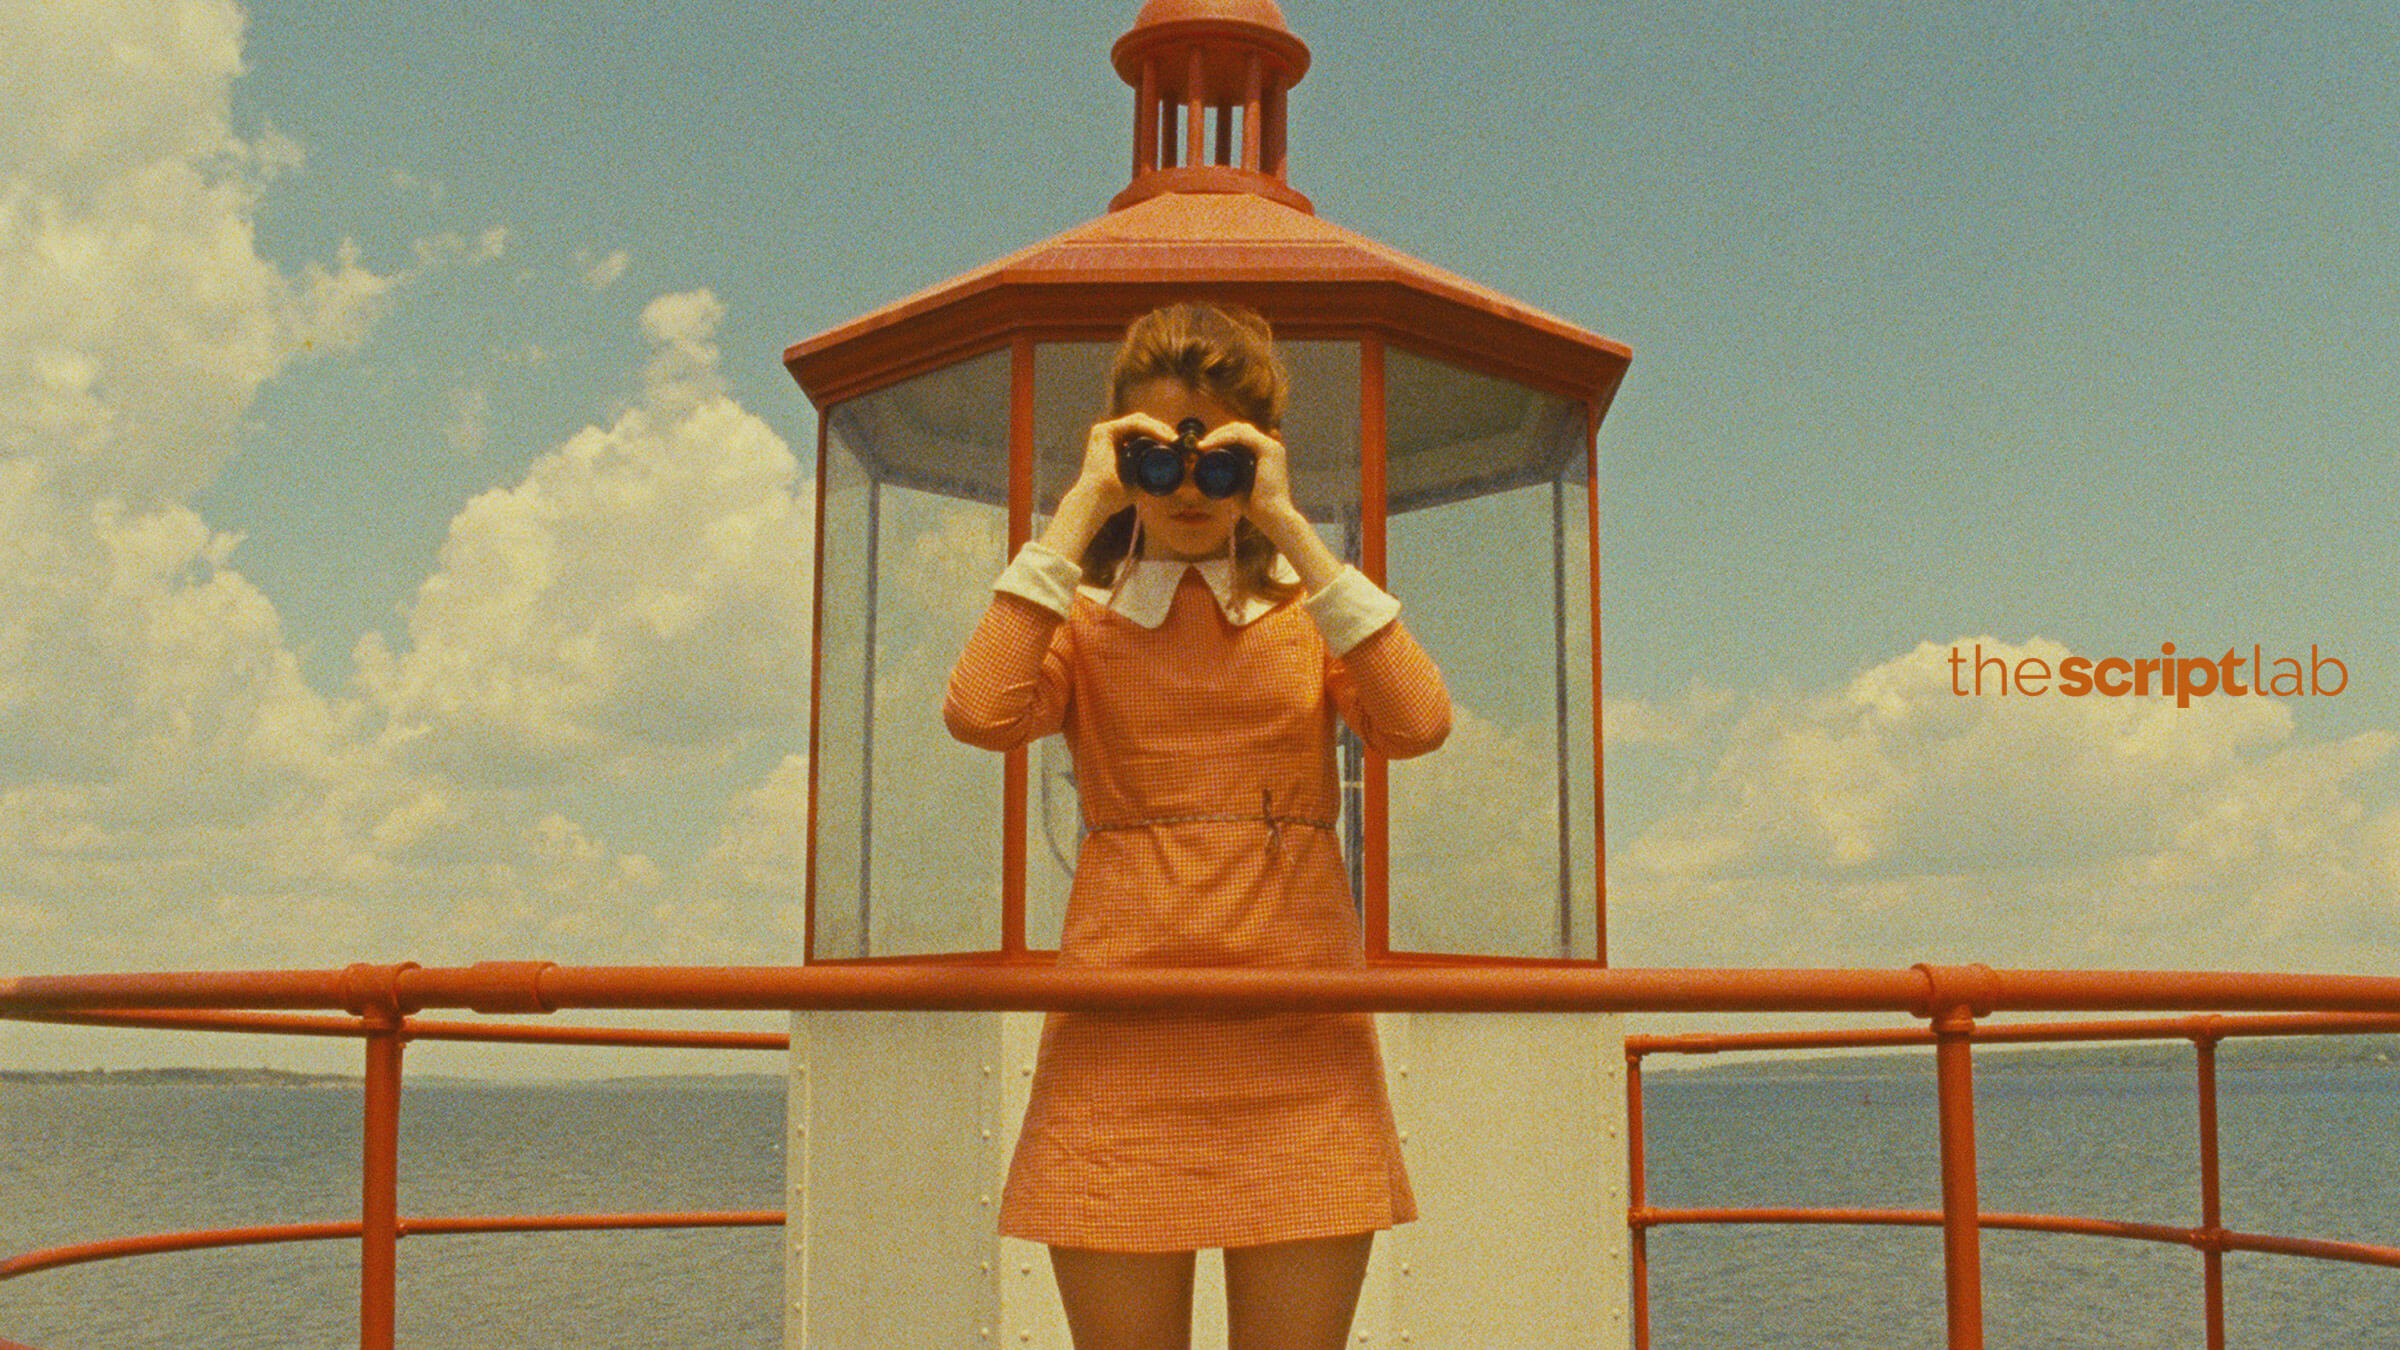 The Fascinatingly Small Worlds in Wes Anderson Films